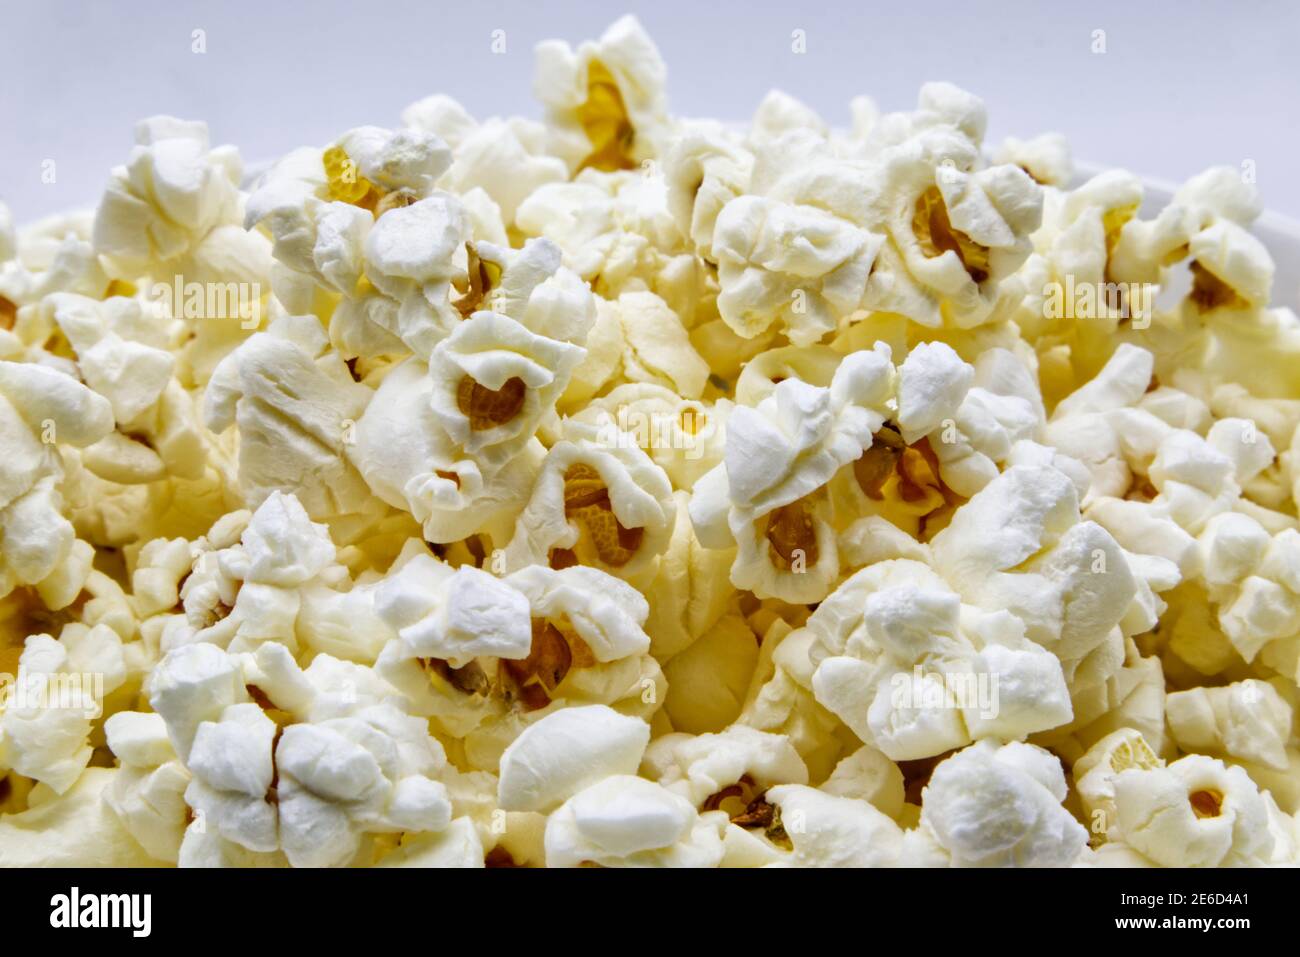 A bowl of Popcorn isolated on white background Stock Photo